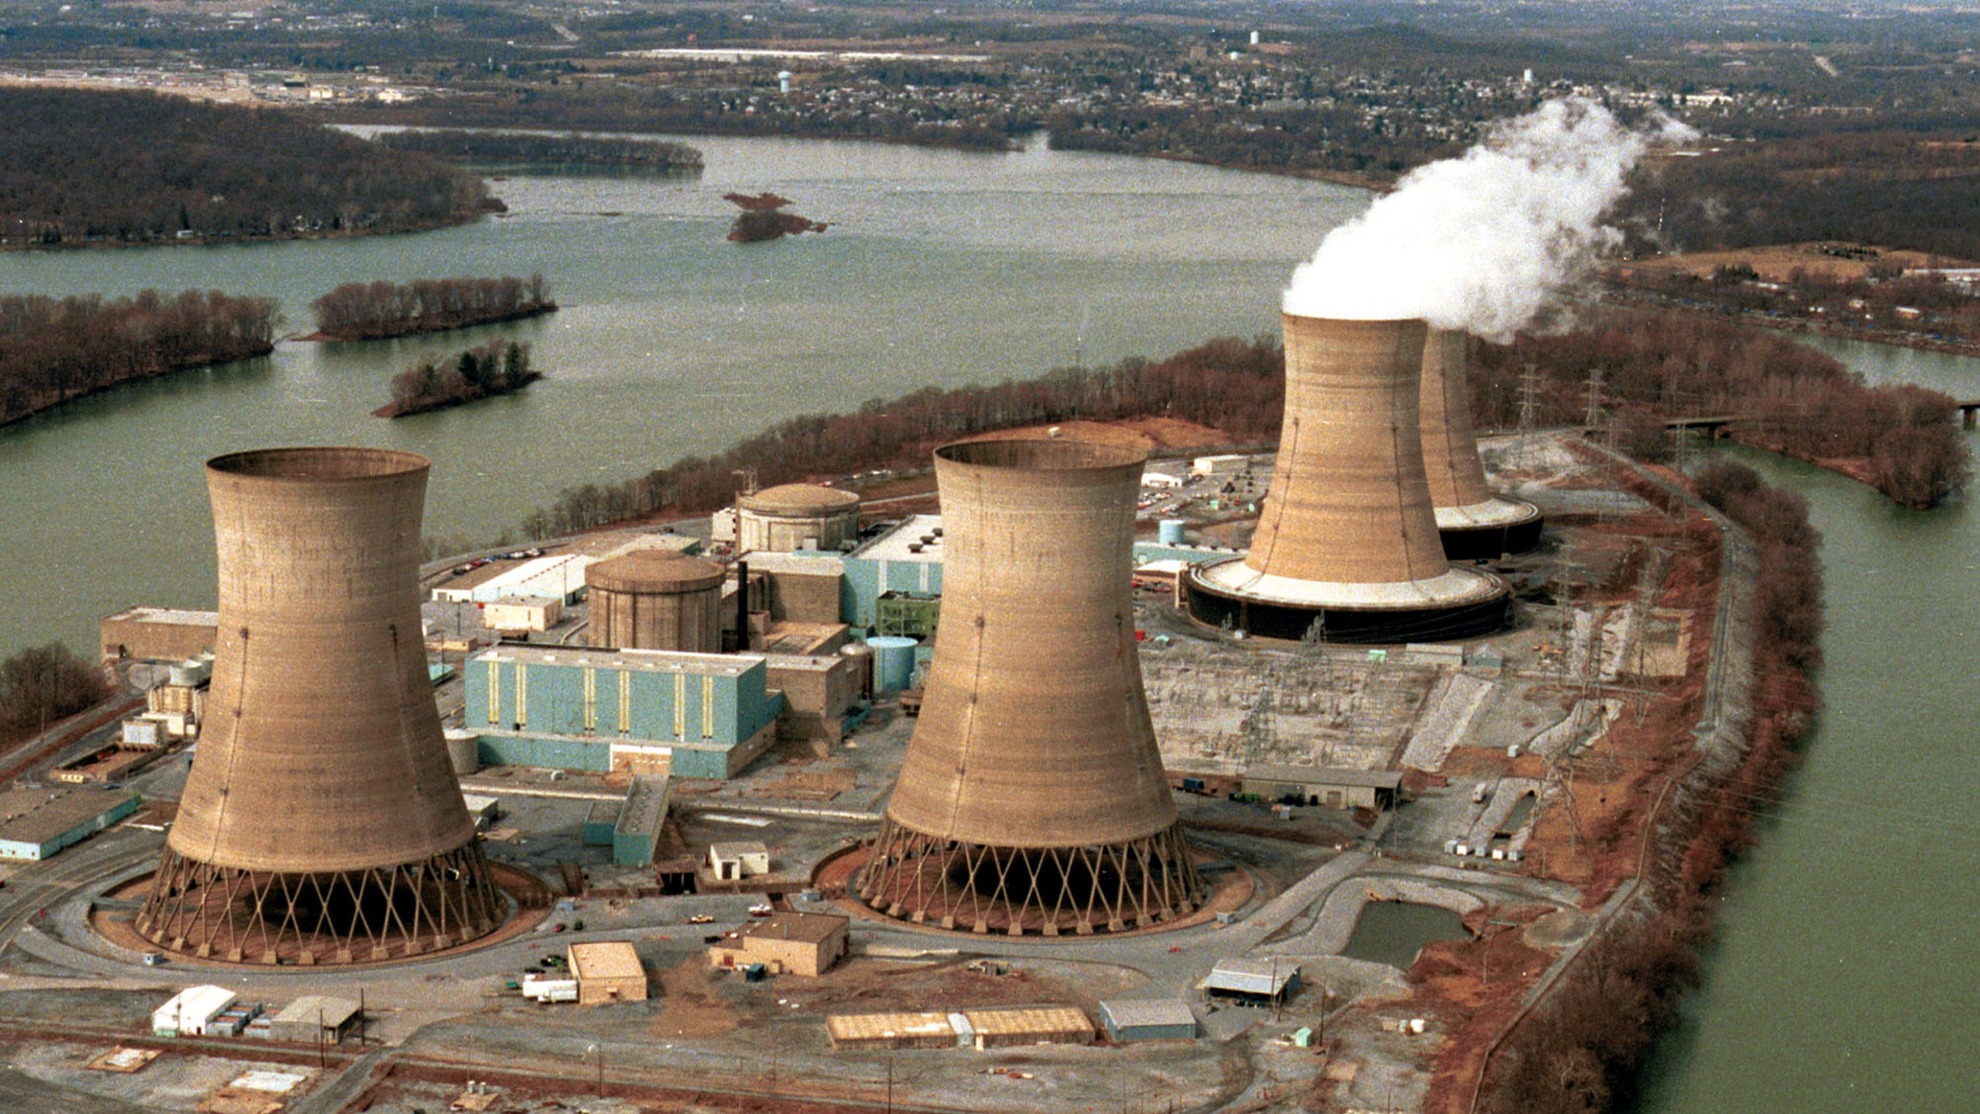 Three Mile Island is seen in the foreground with the damaged reactor